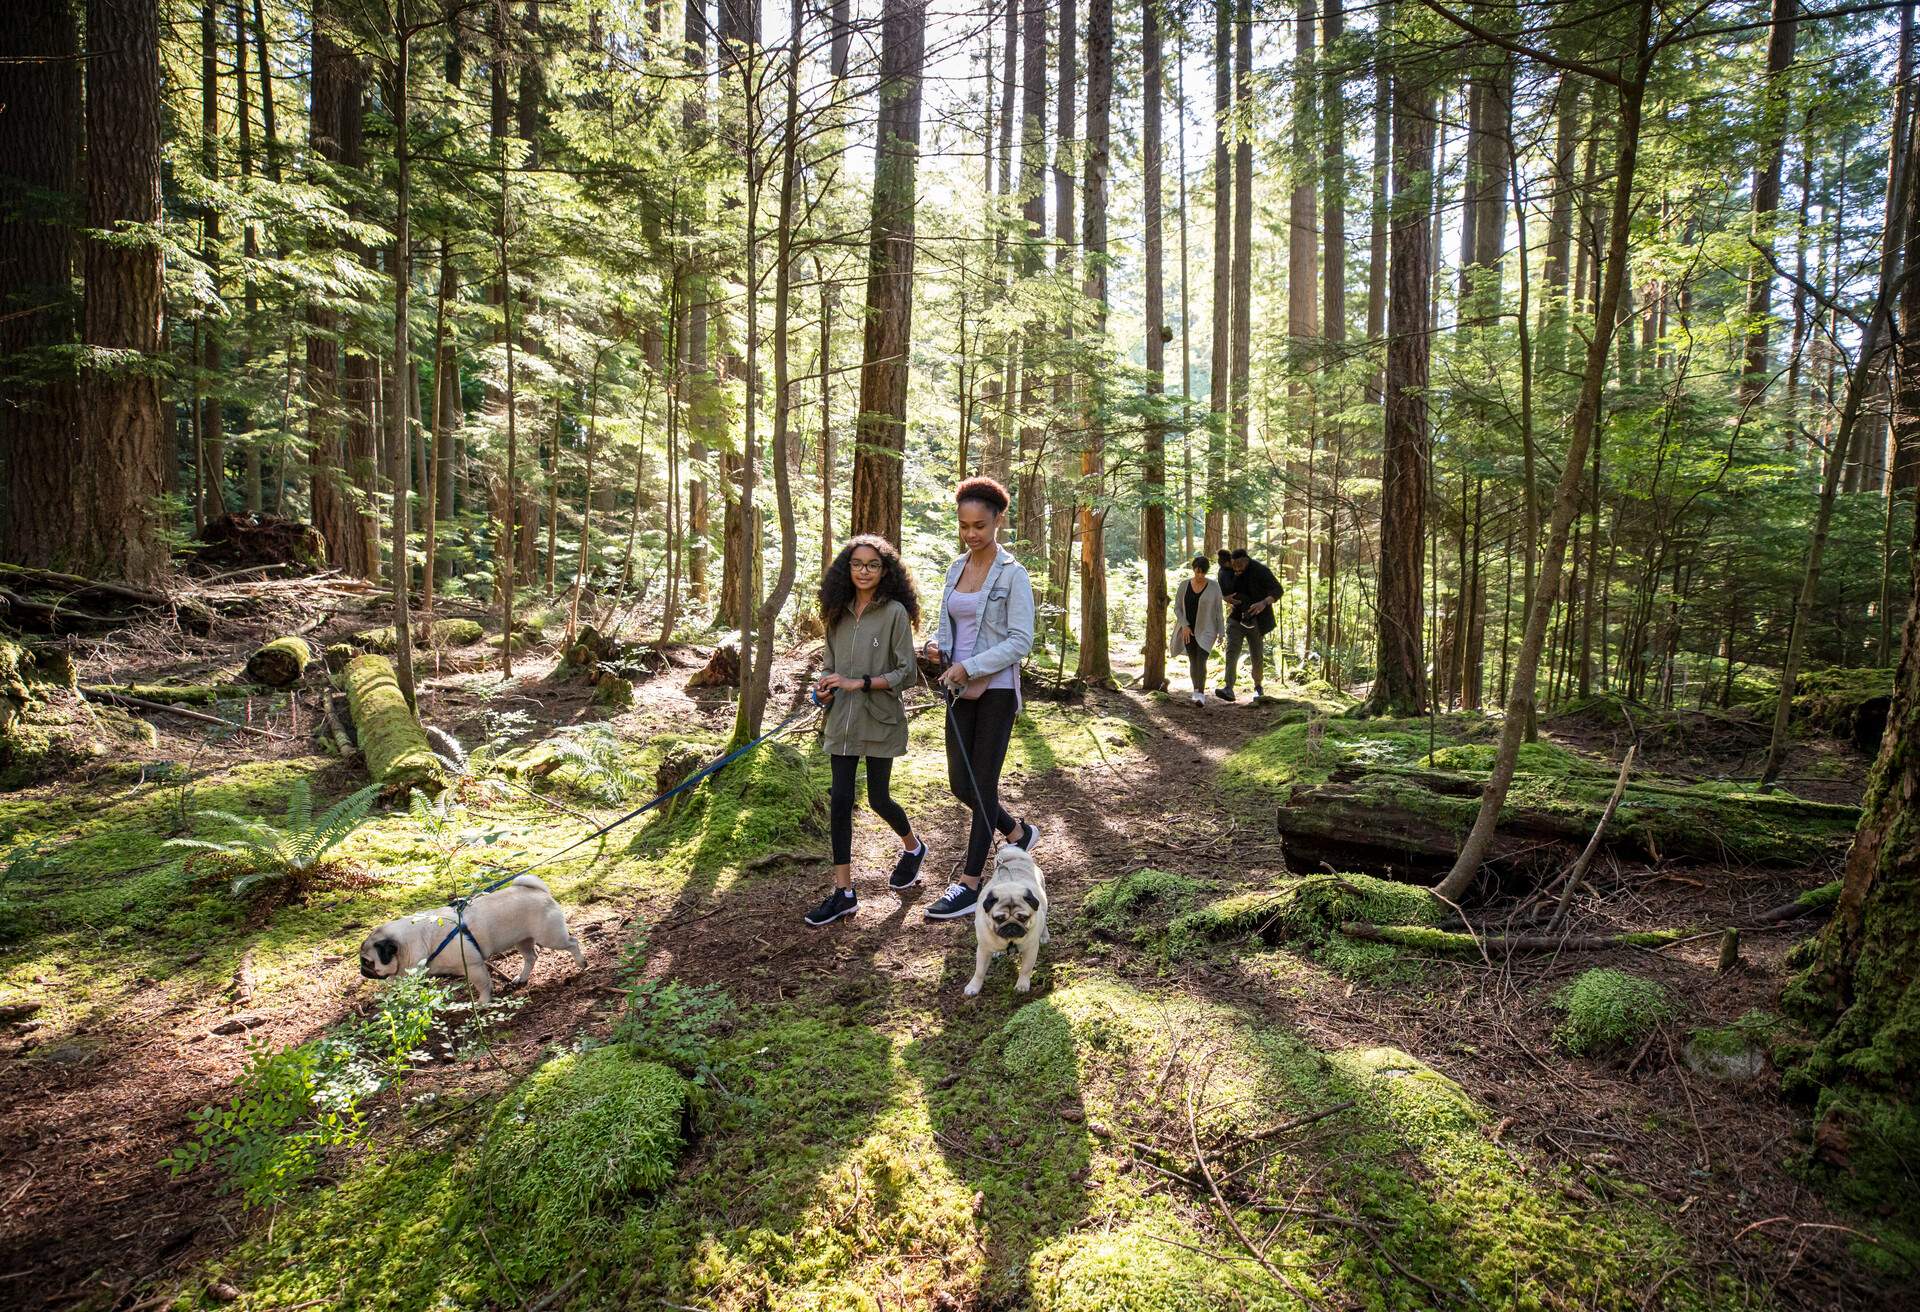 DEST_CANADA_NORTH-VANCOUVER_THEME_DOGS_HIKING_FAMILY_GettyImages-1260485554